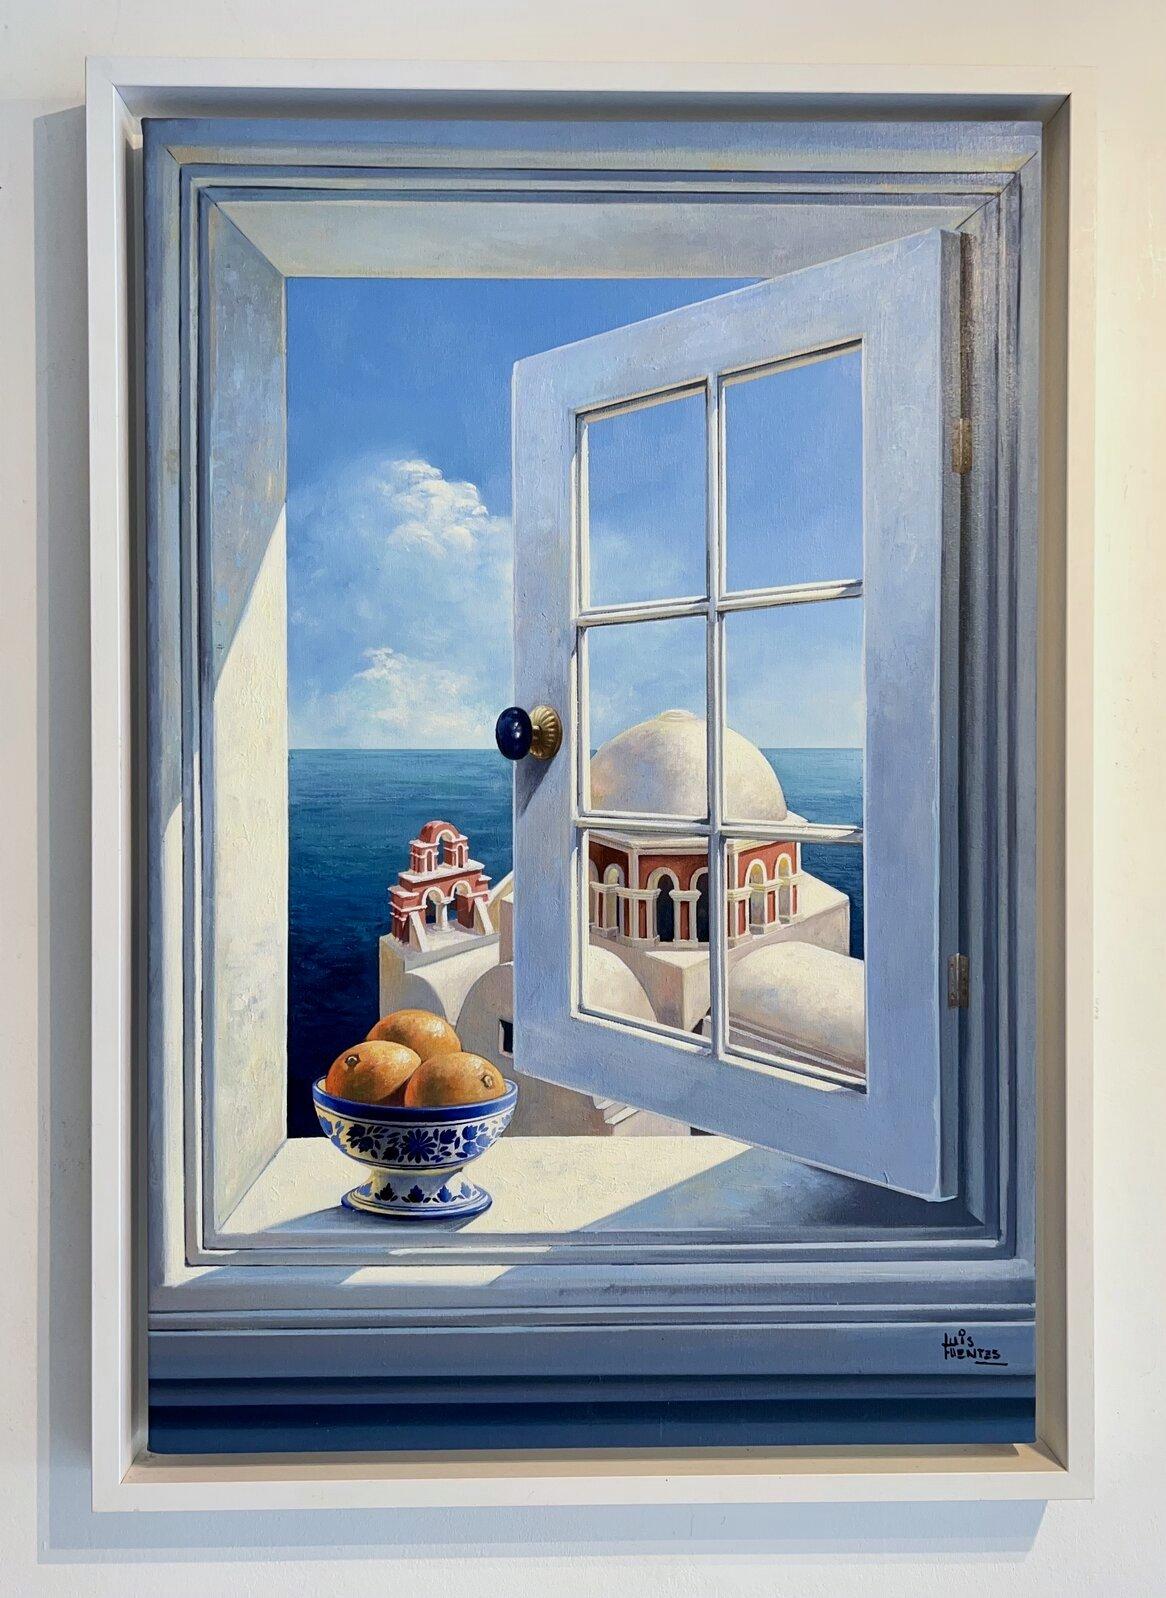 Blue Sky-original surreal realism seascape-architecture-still life oil painting - Painting by Luis Fuentes